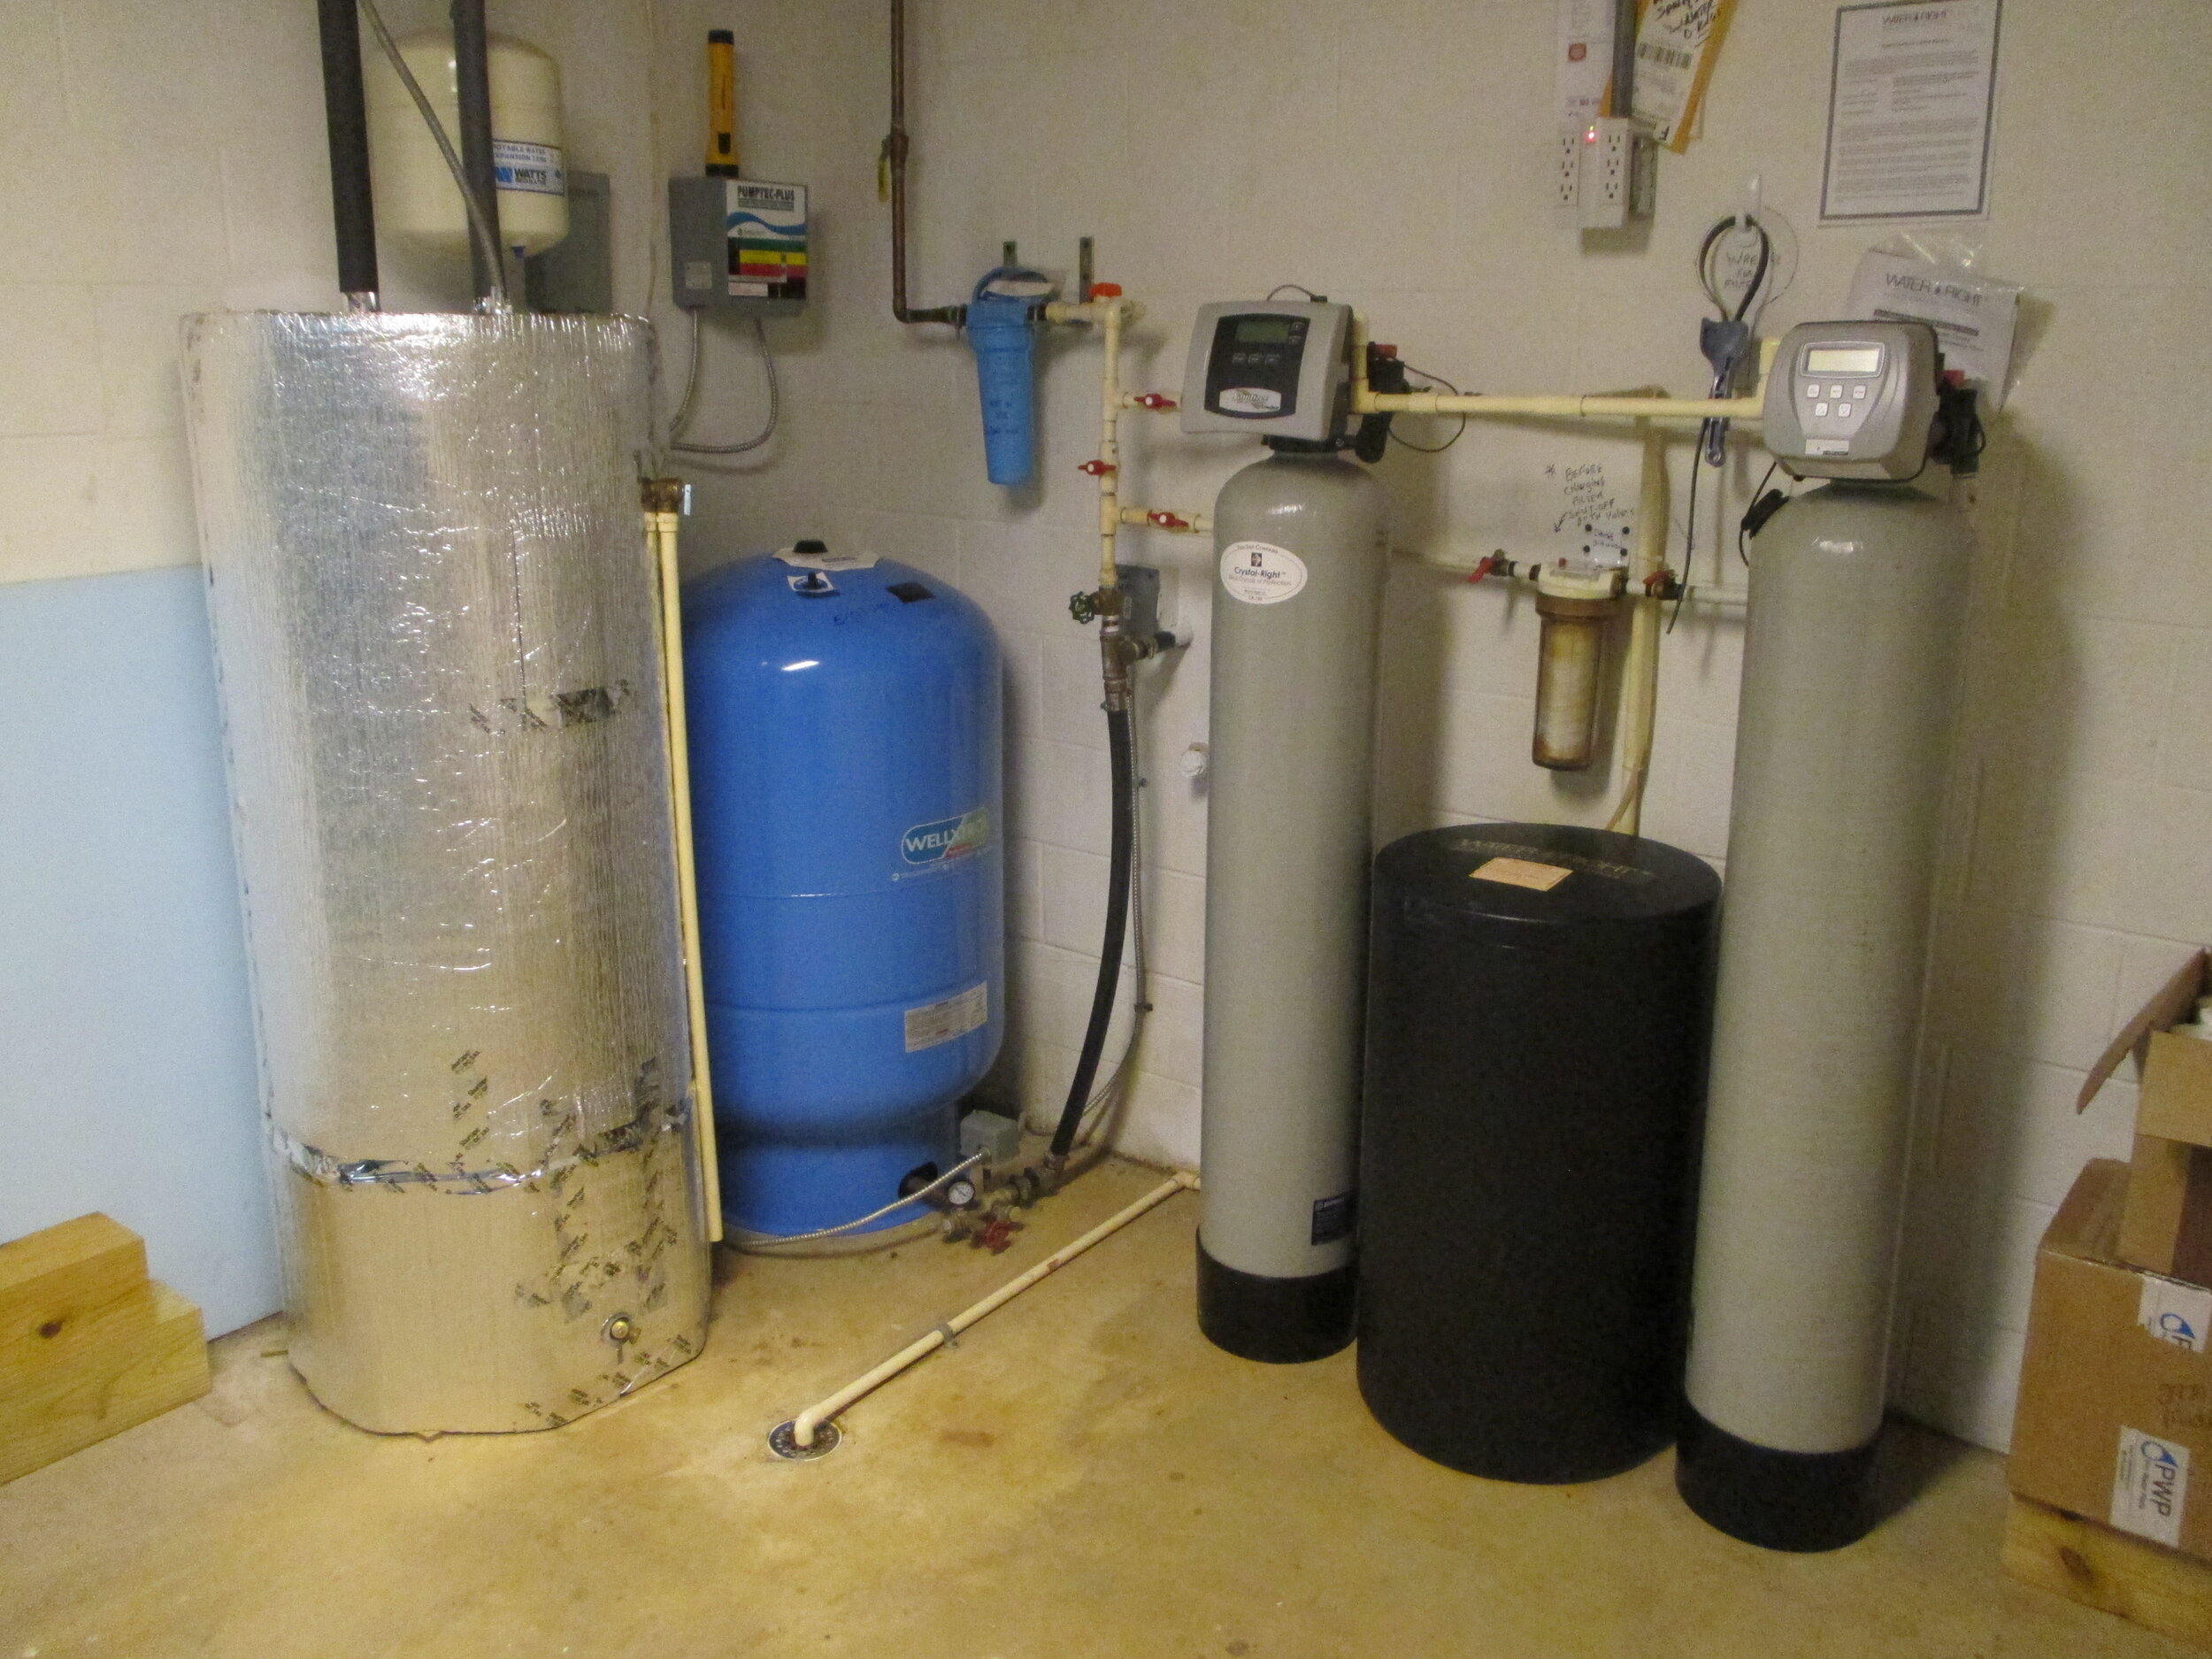 Basement Water Supply and Treatment Equipment